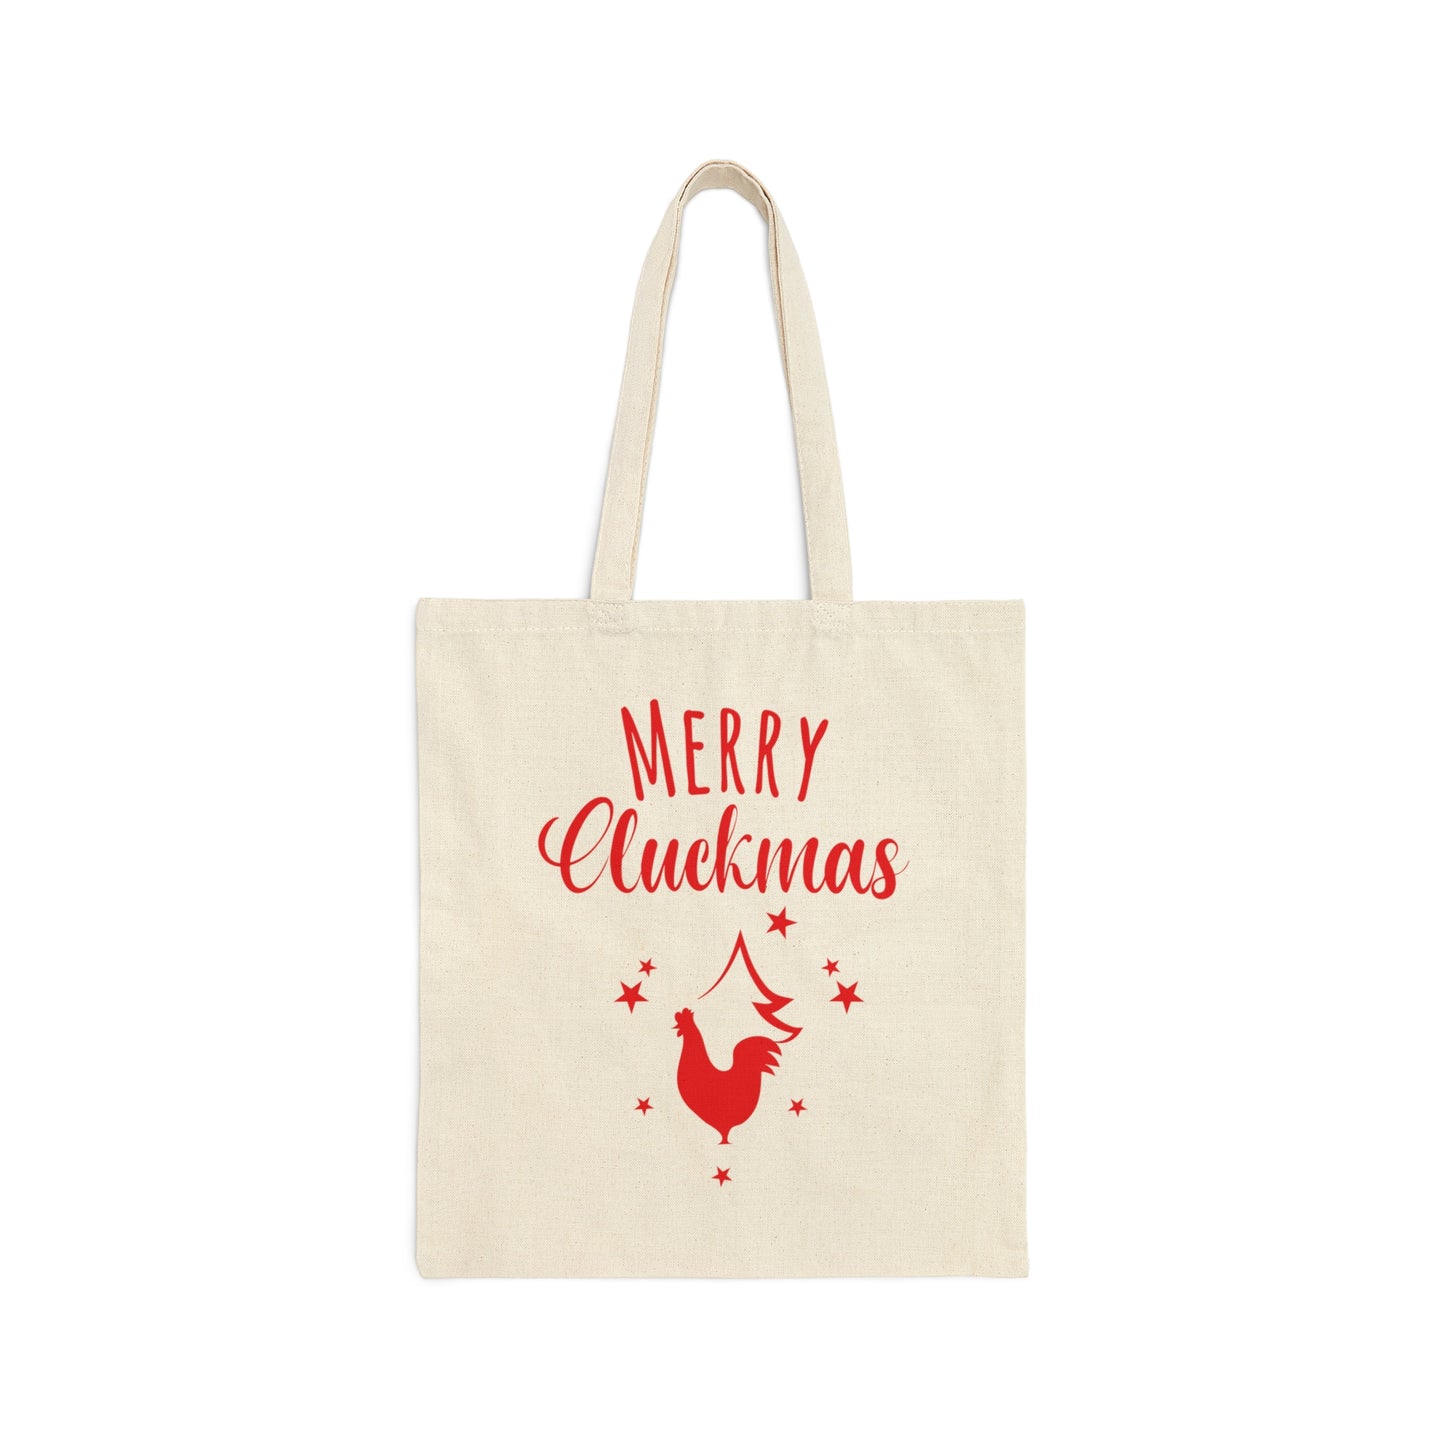 Merry Cluckmas Happy New Year Christmas Quotes Canvas Shopping Cotton Tote Bag